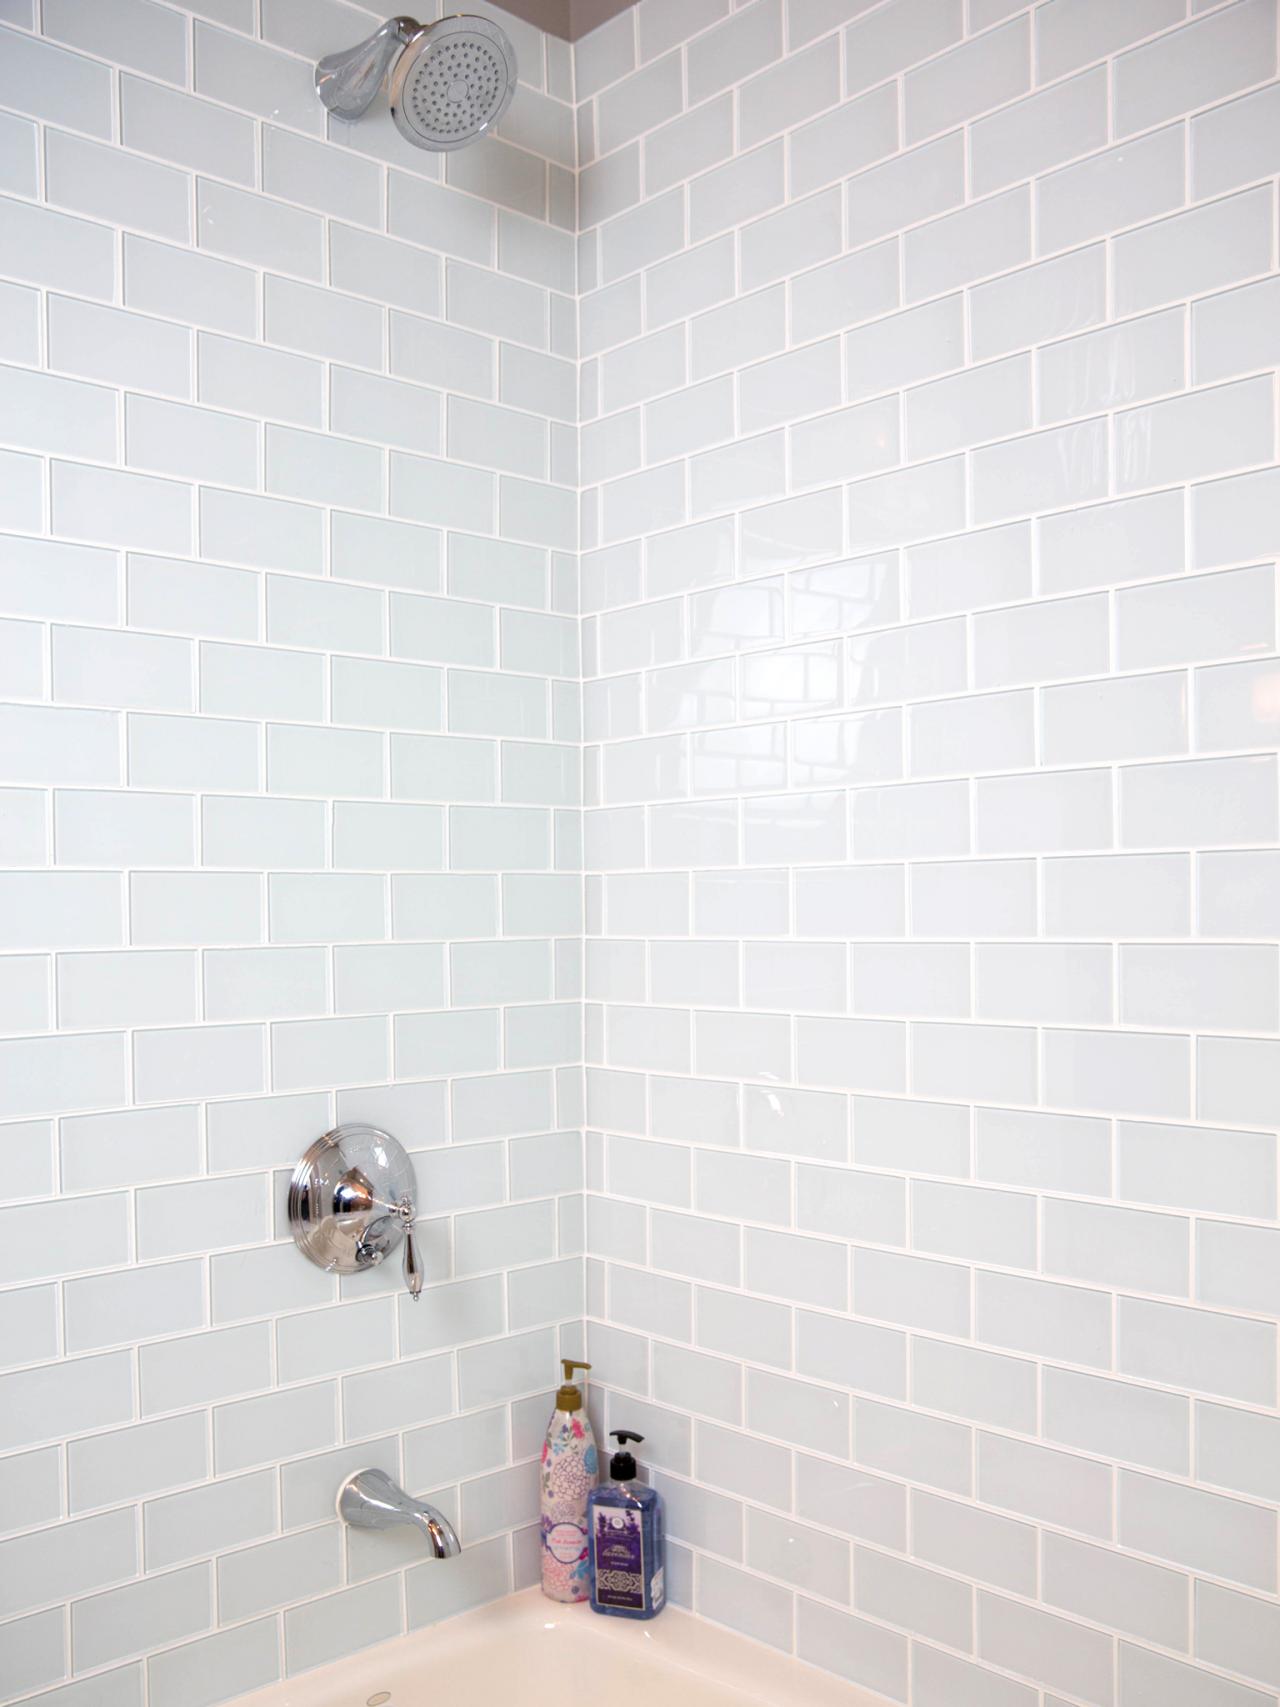 How To Install A Shower Tile Wall, How To Fix Tile In Bathroom Shower